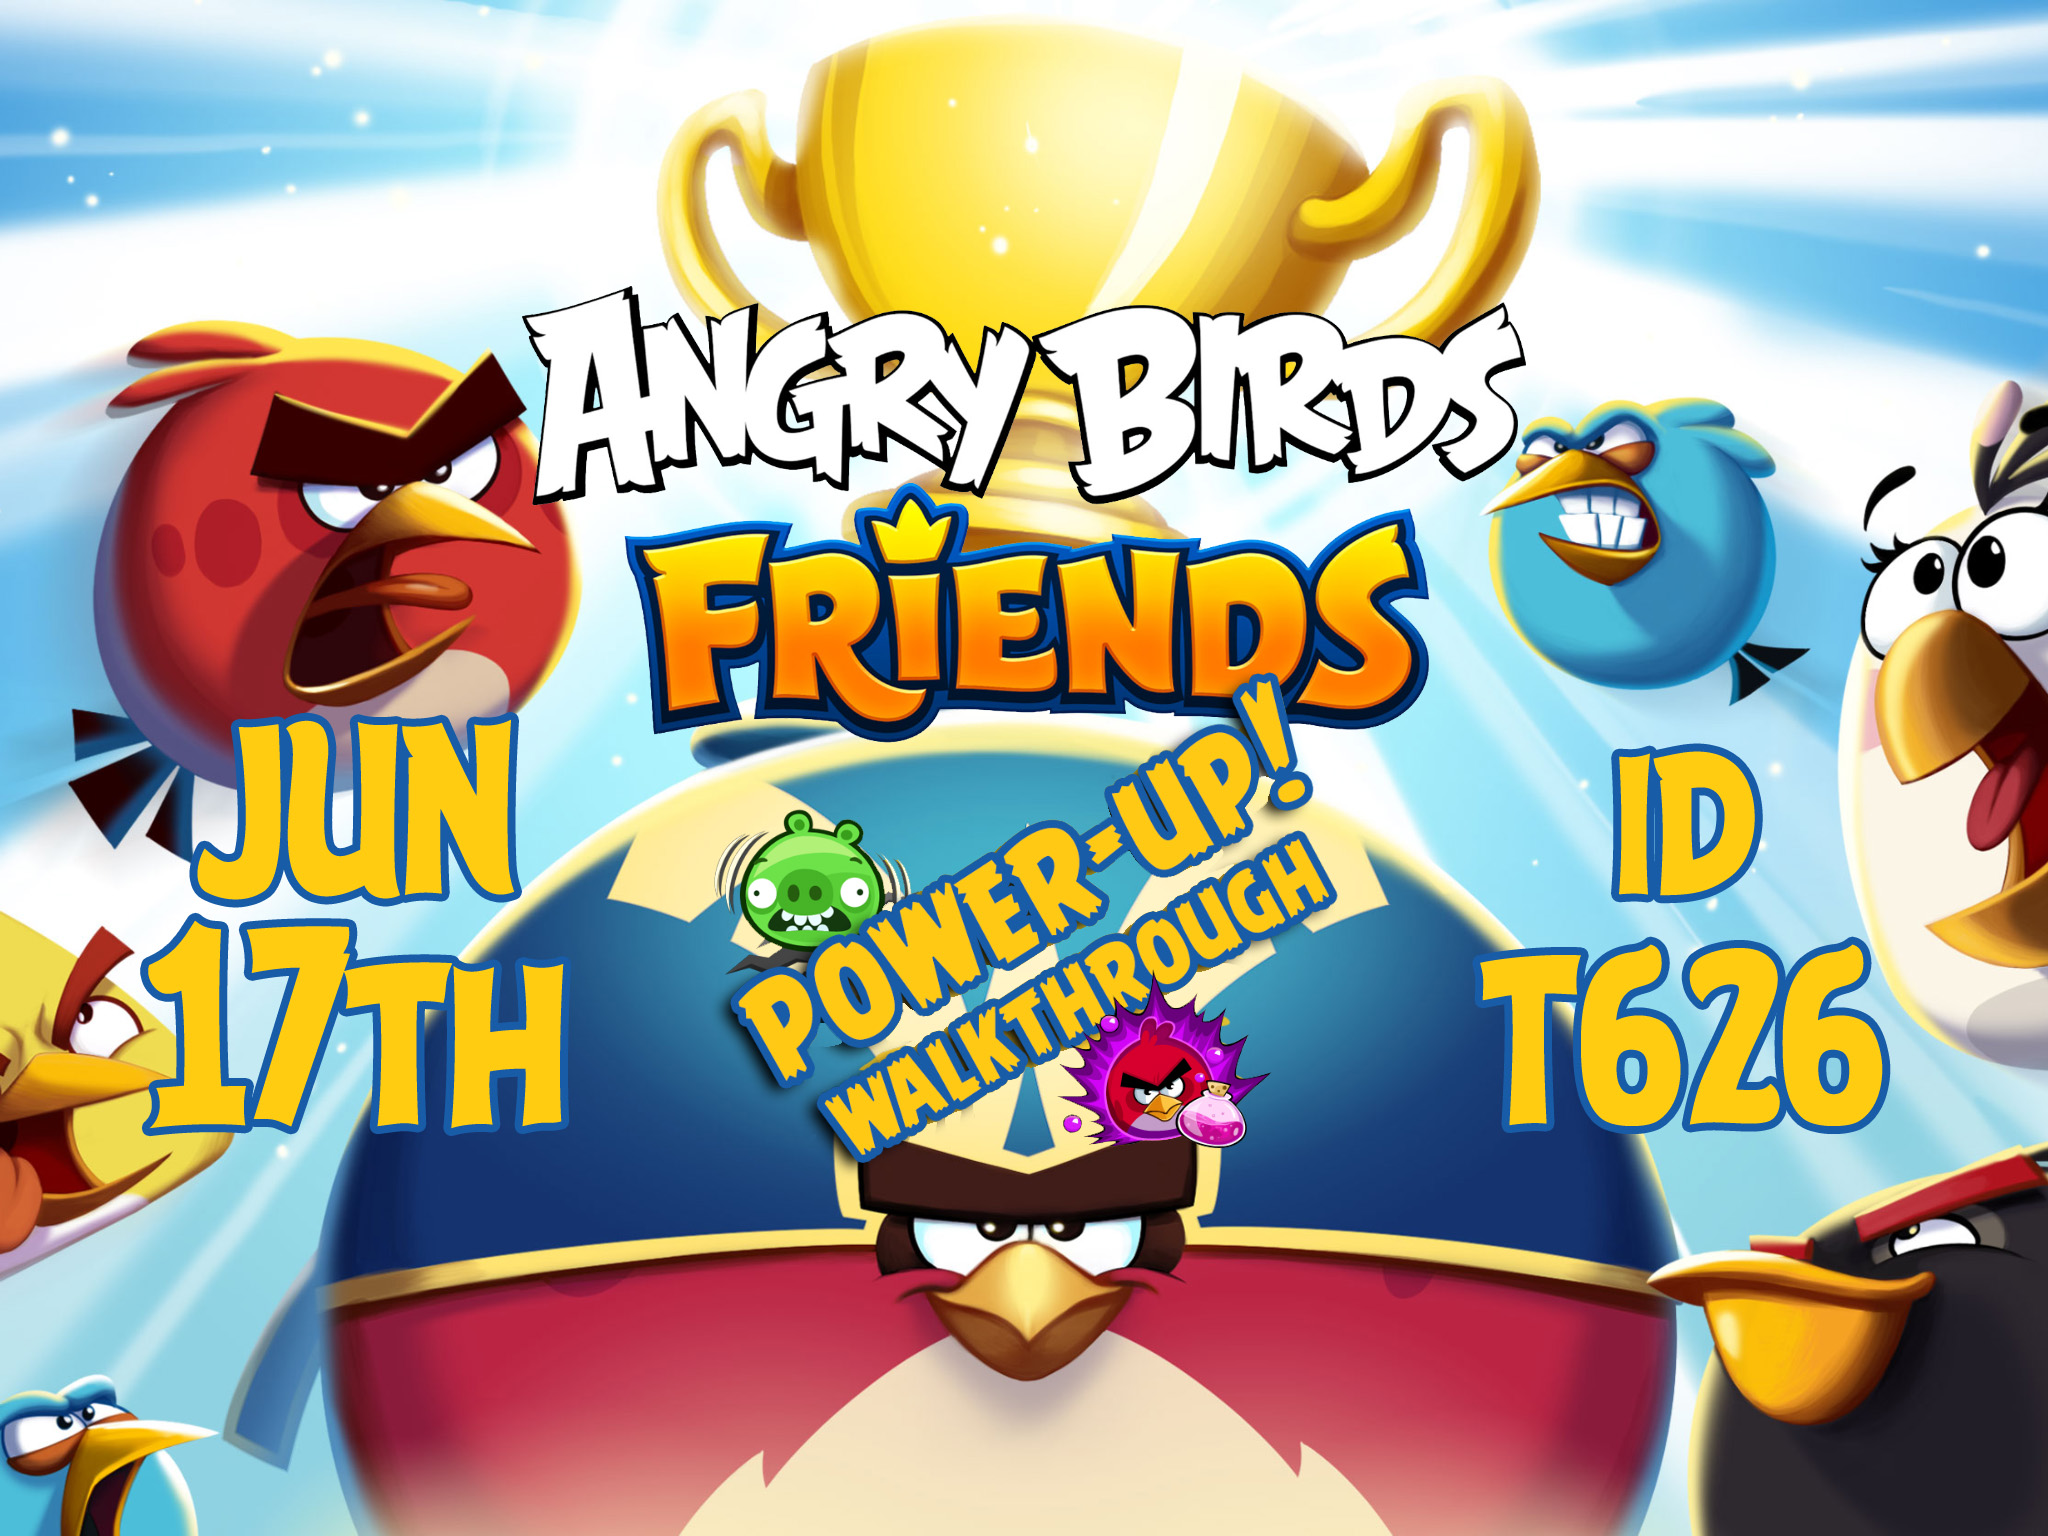 Angry-Birds-Friends-Tournament-T626-Feature-Image-PU